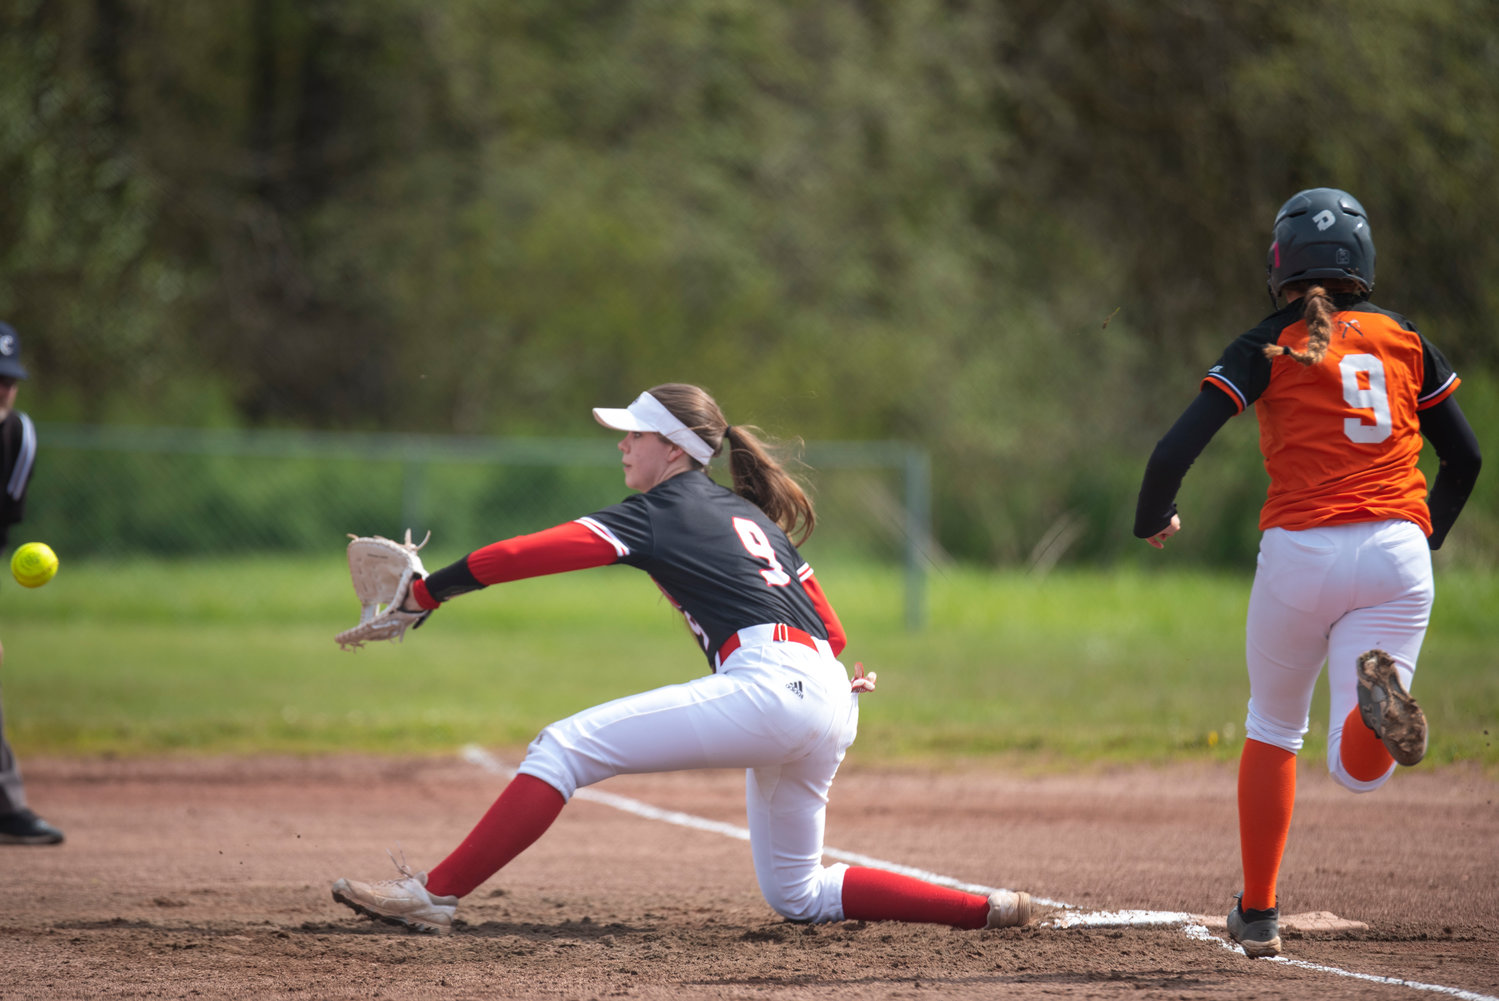 Toledo first baseman Averie Robins (9) stretches to catch a throw while Rainier's Dakota Anderson (8) sprints to first during a game on April 22.